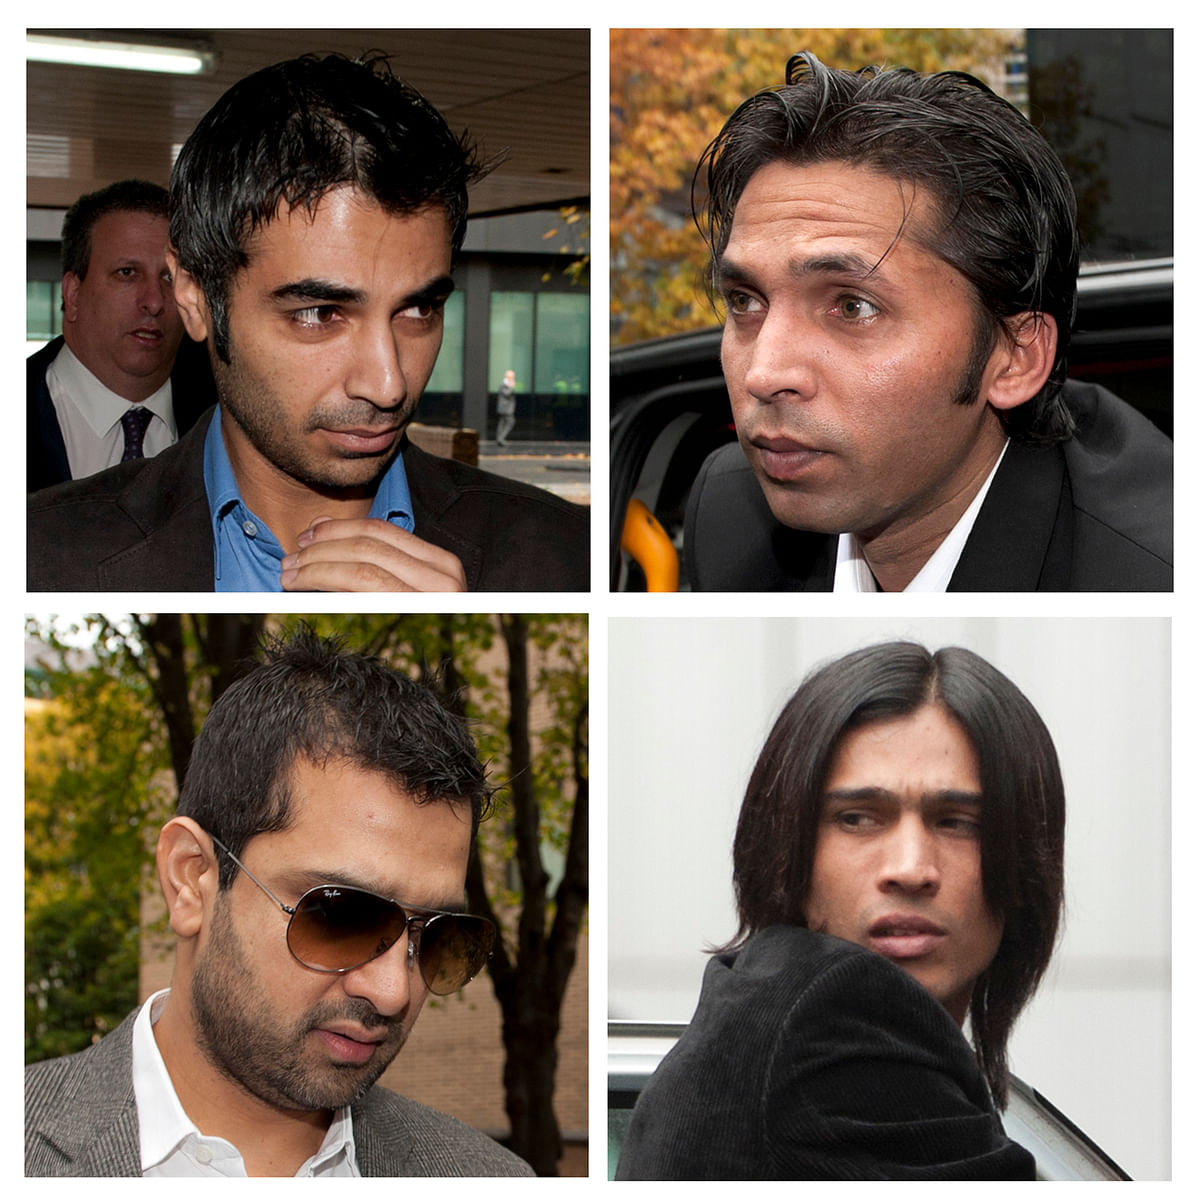 The ICC has decided to lift the ban on former Pakistani cricketers guilty of match fixing. Breach of fans’ trust?